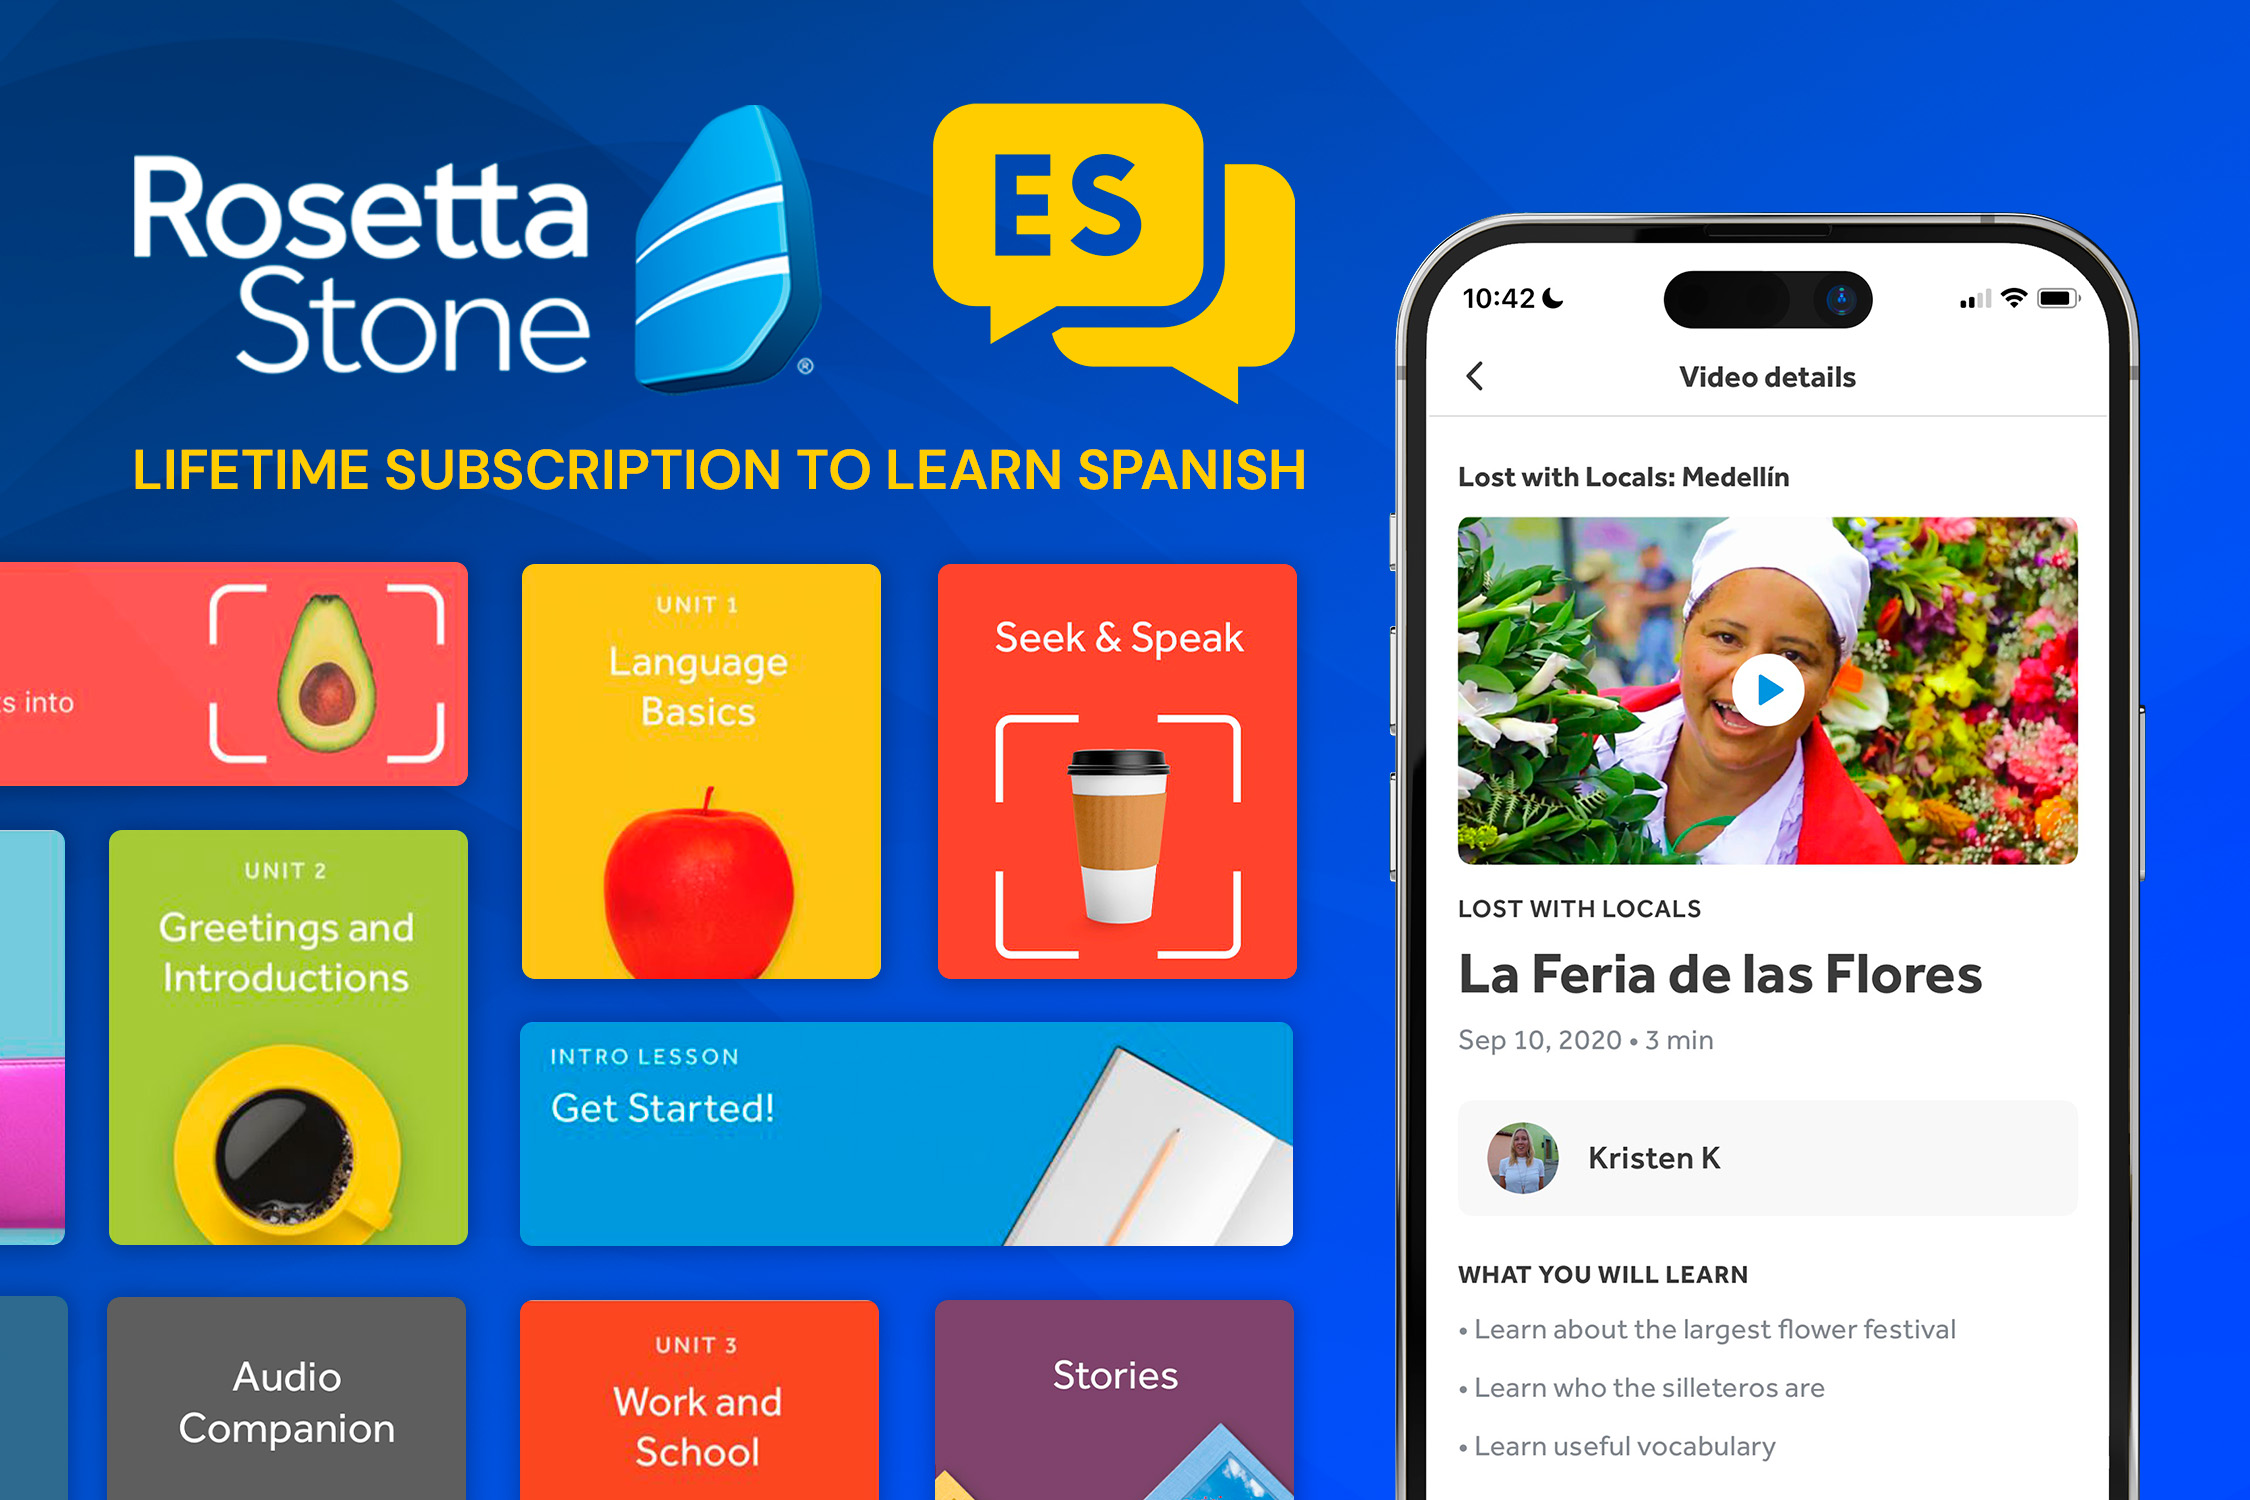 Rosetta Stone can help you progress through your Spanish learning journey for only $120